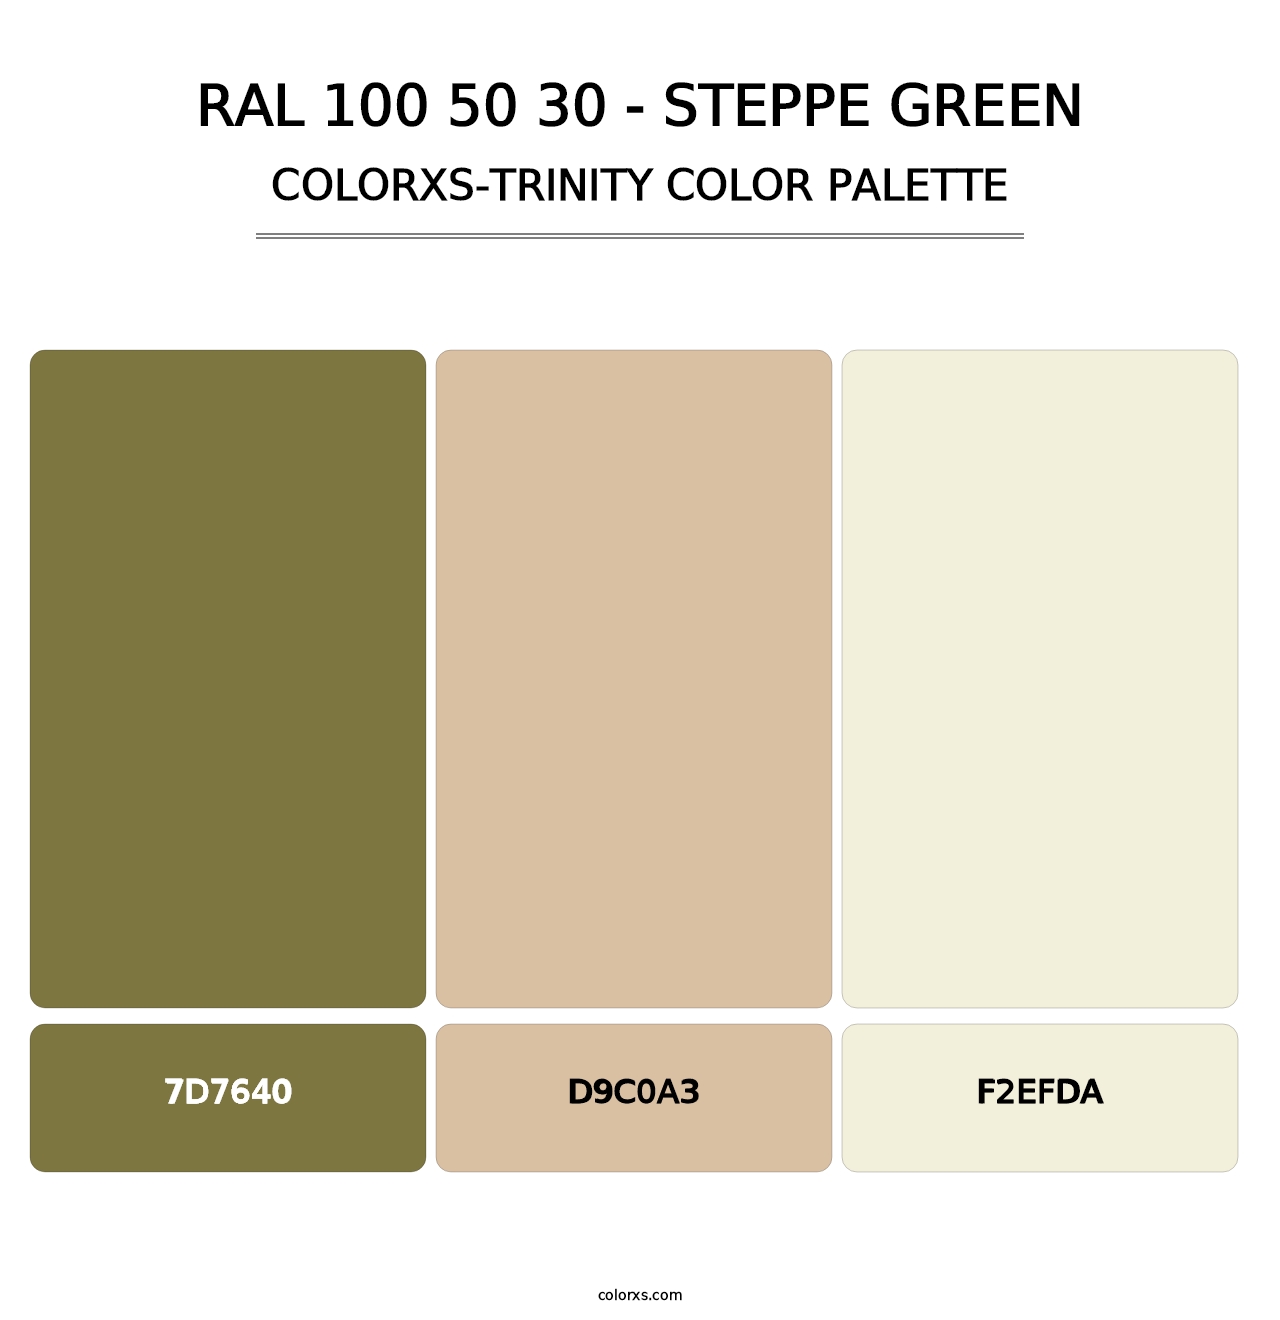 RAL 100 50 30 - Steppe Green - Colorxs Trinity Palette